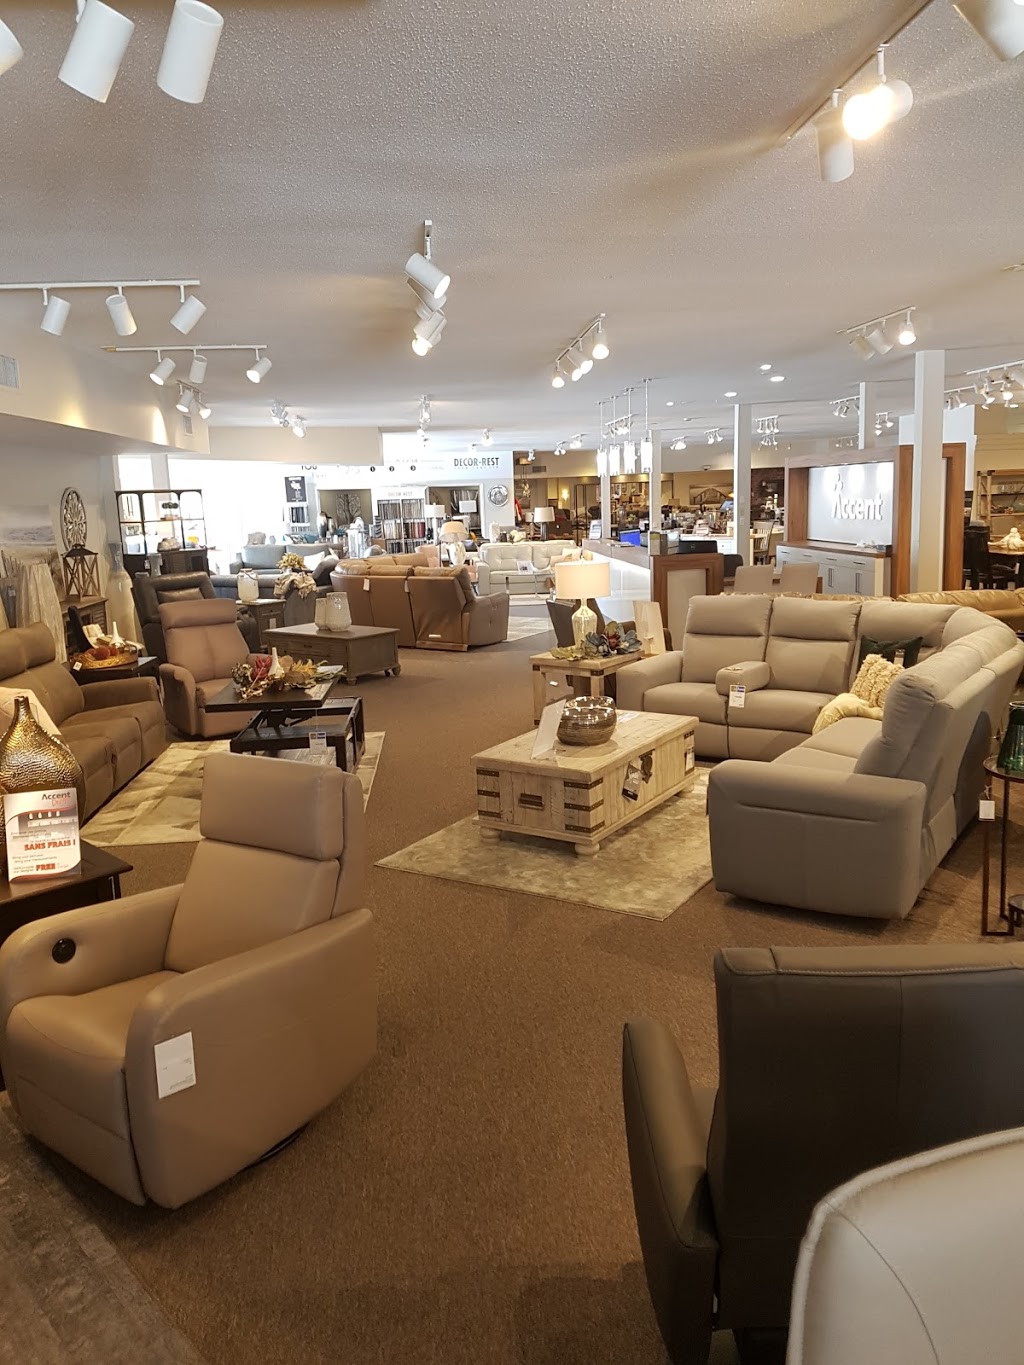 Accent, Meubles R. Lalonde Furniture | furniture store | 2832 Laurier St, Rockland, ON K4K 1A2, Canada | 6134464686 OR +1 613-446-4686